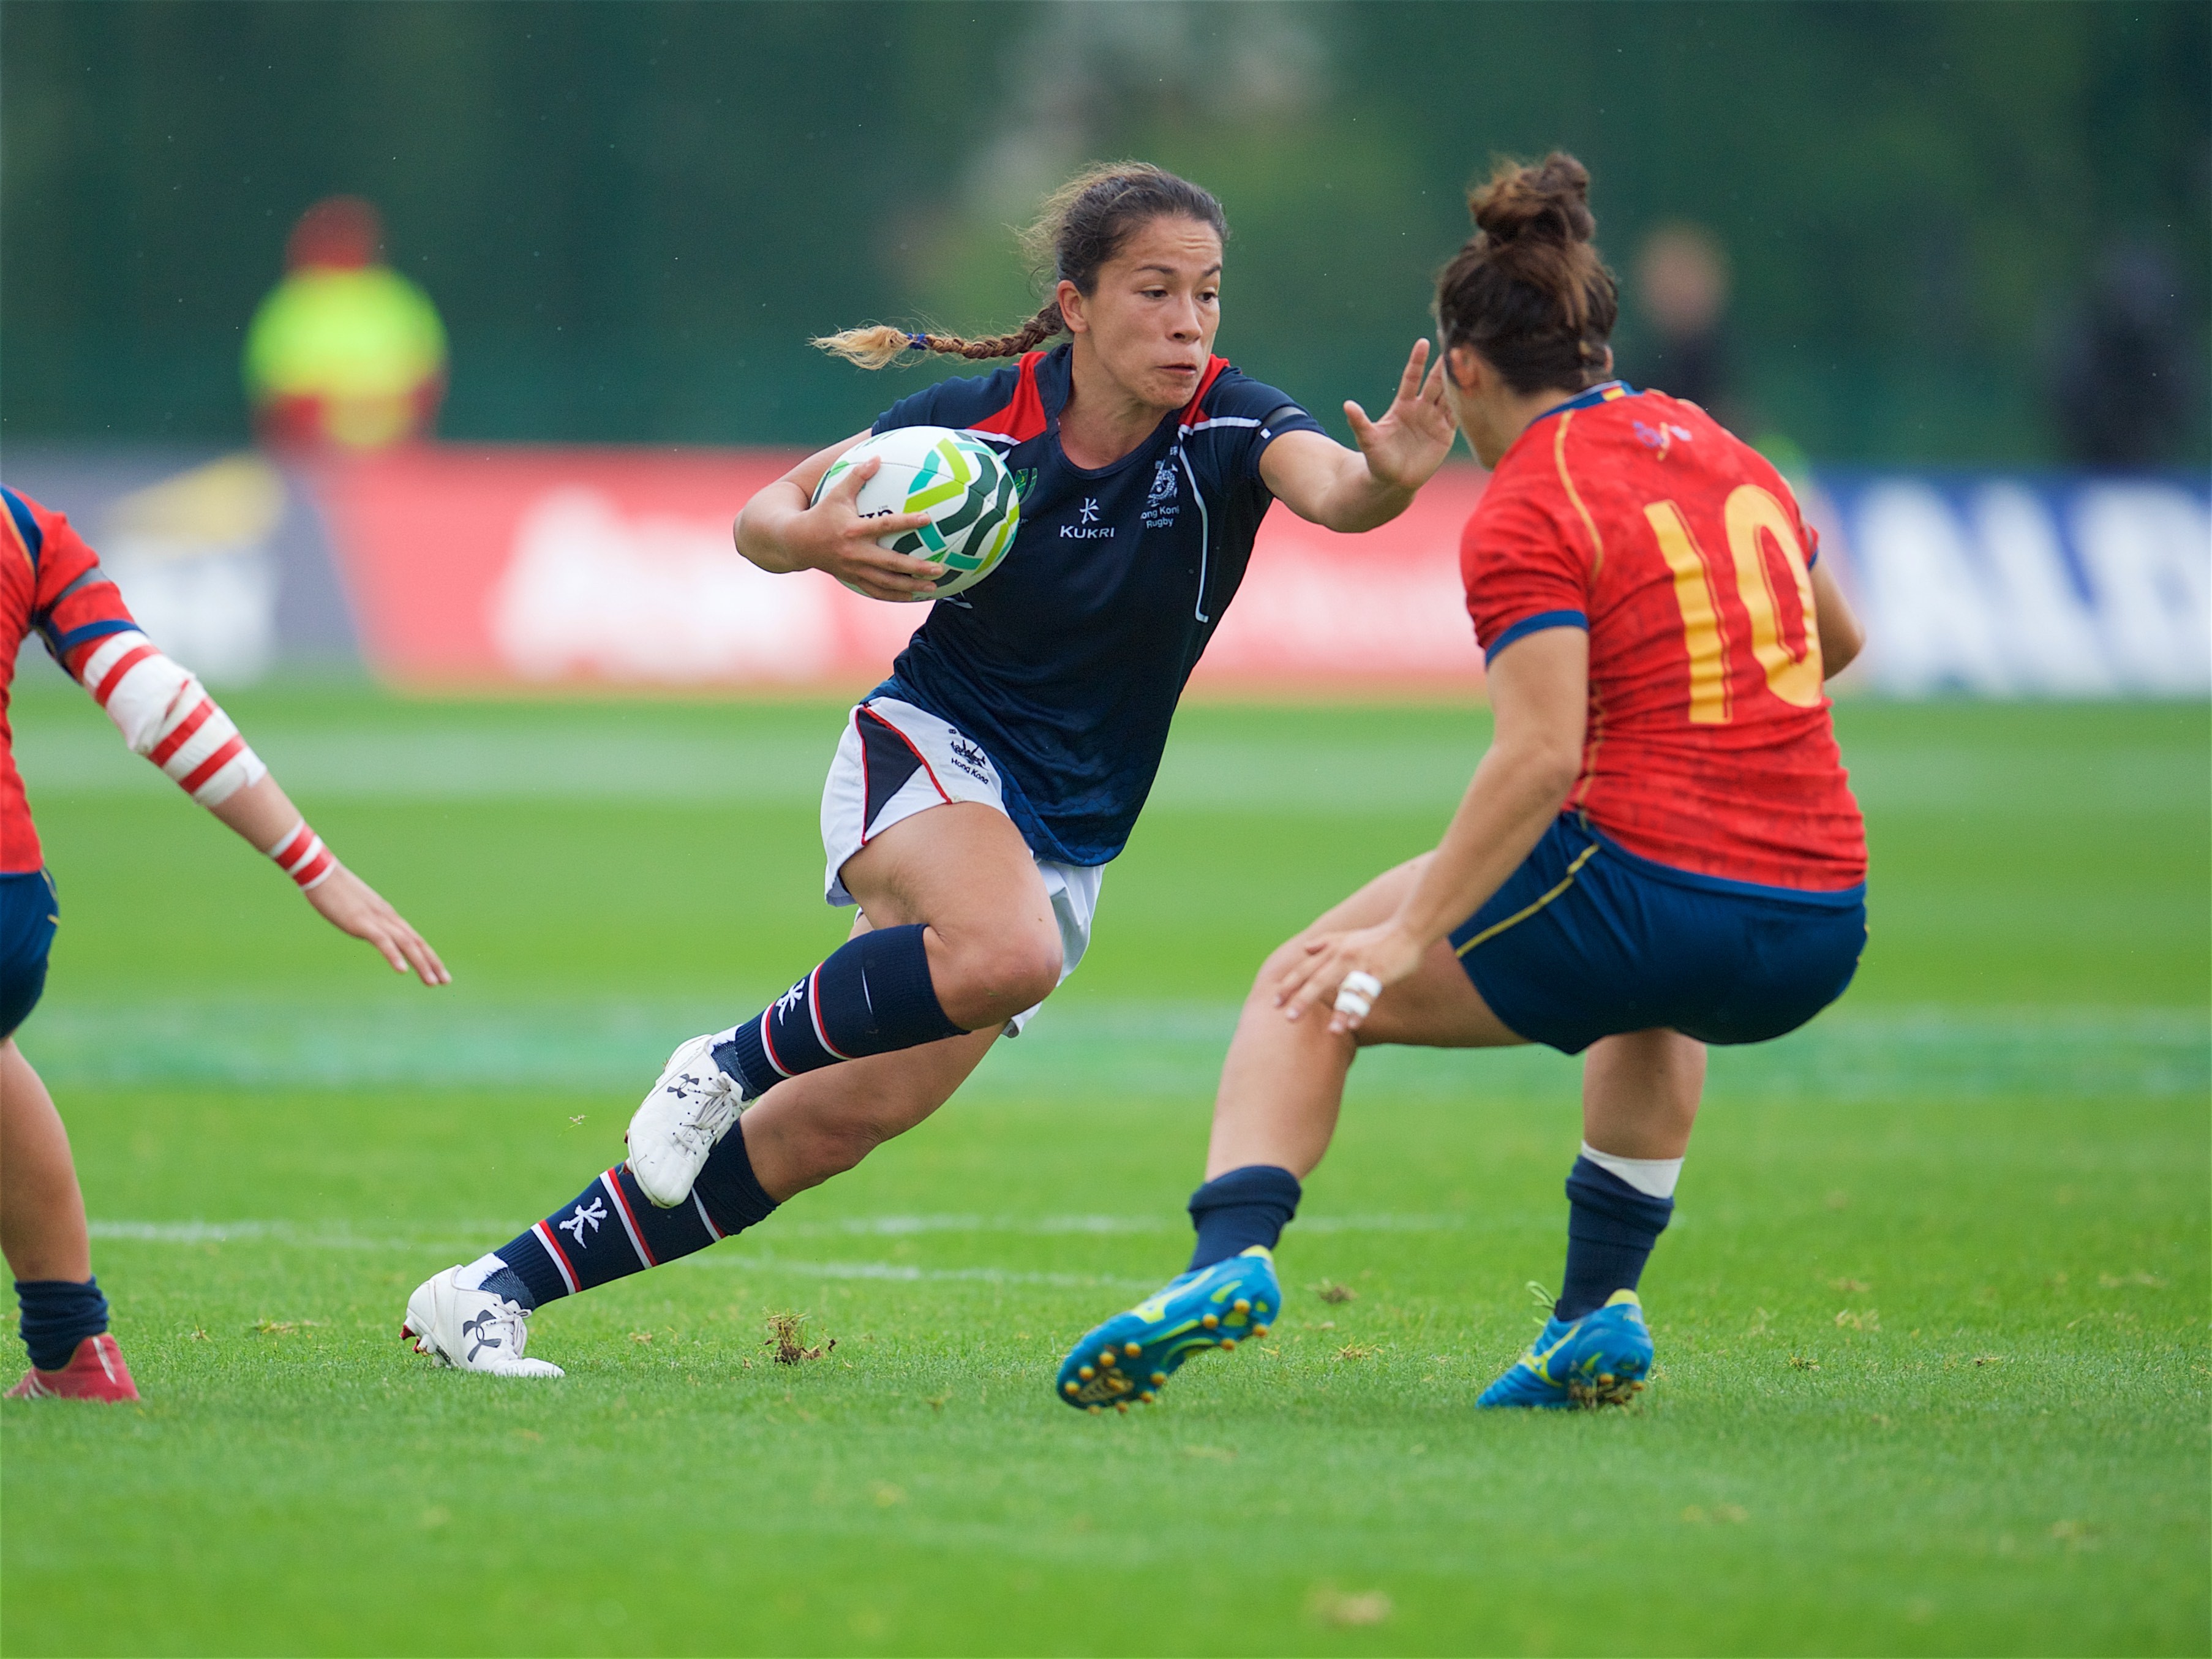 Rose Hopewell-Fong in action against Spain. Photo: HKRU